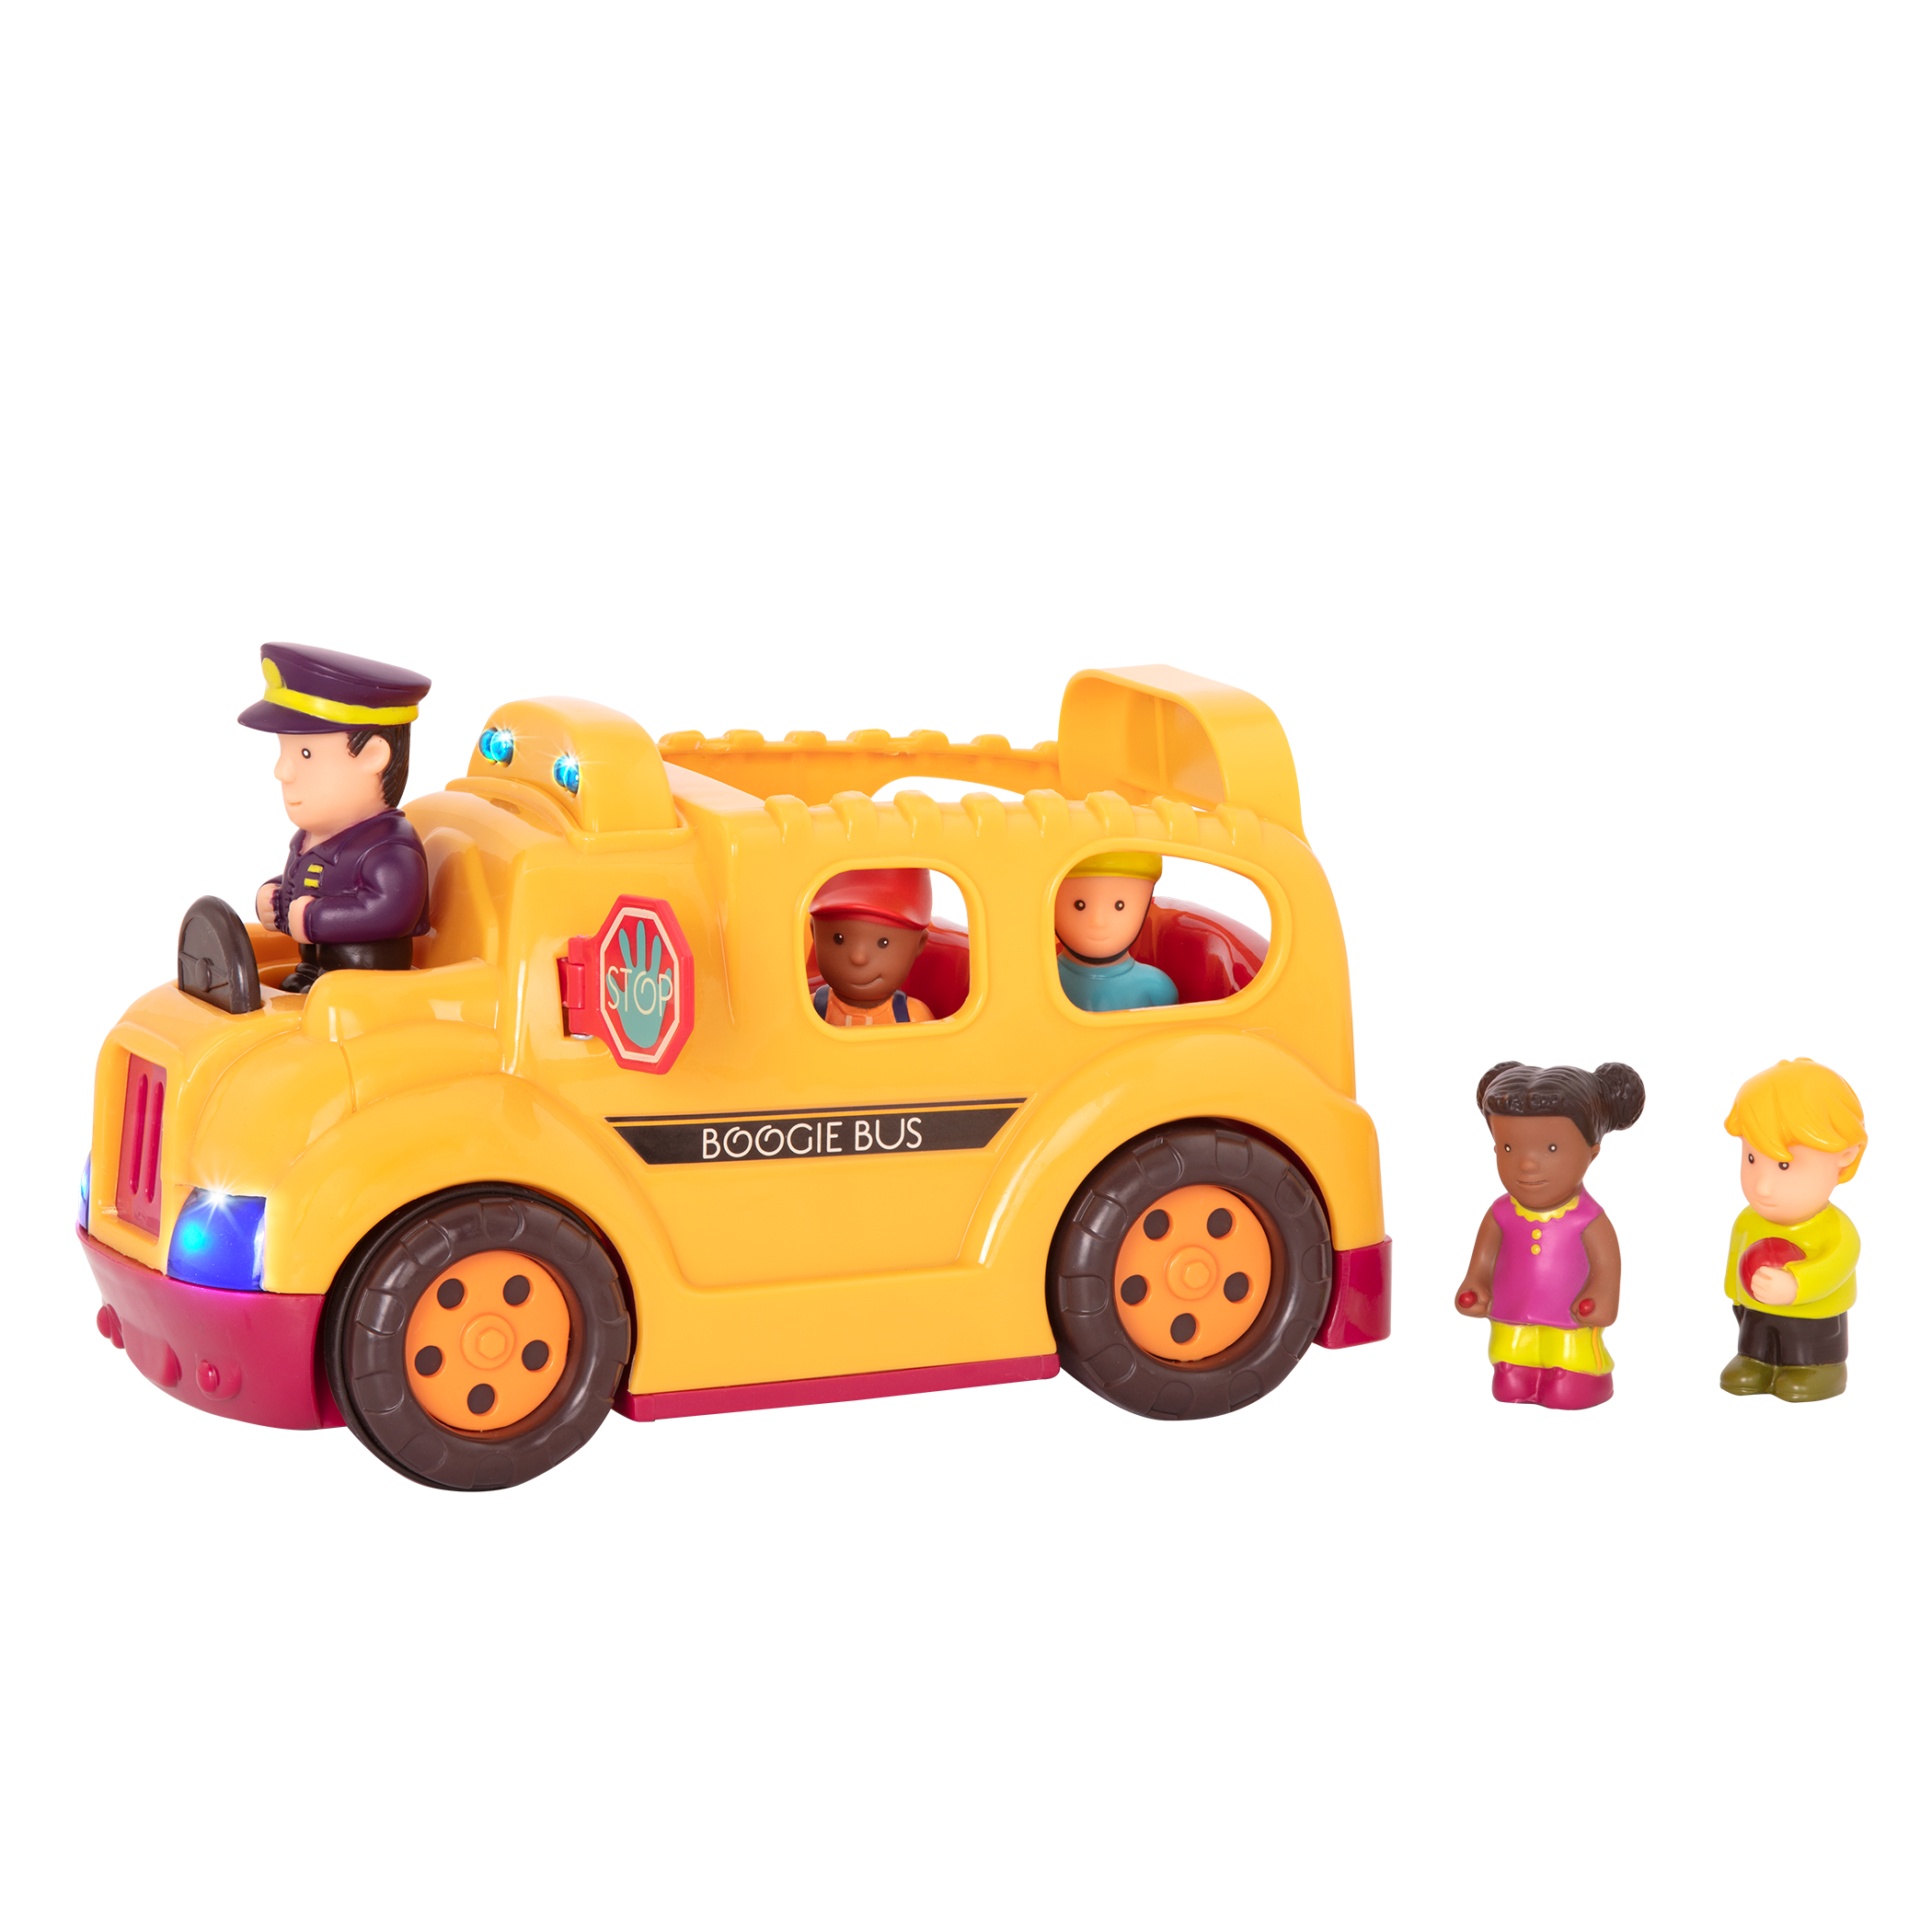 Toy school bus with driver and passengers